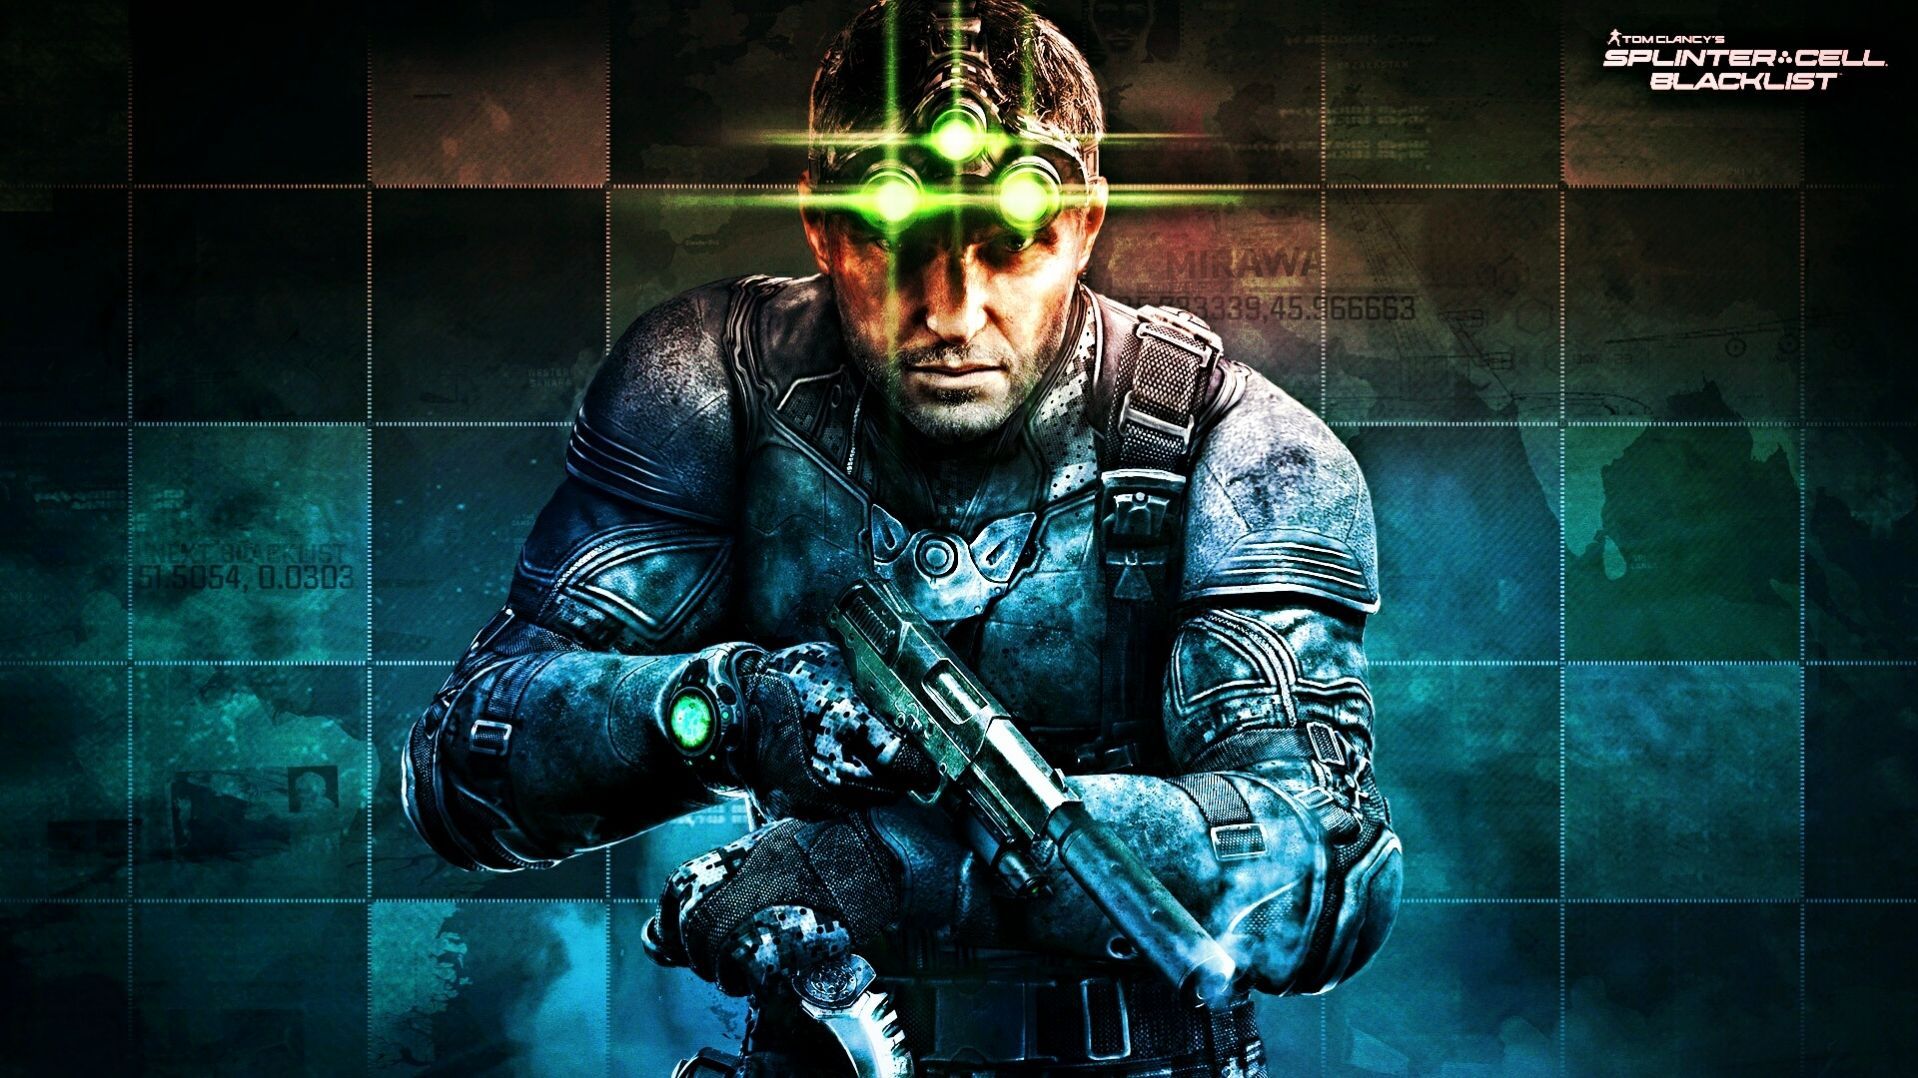 Check out Tom Clancys Splinter Cell HD Wallpaper. We add quality